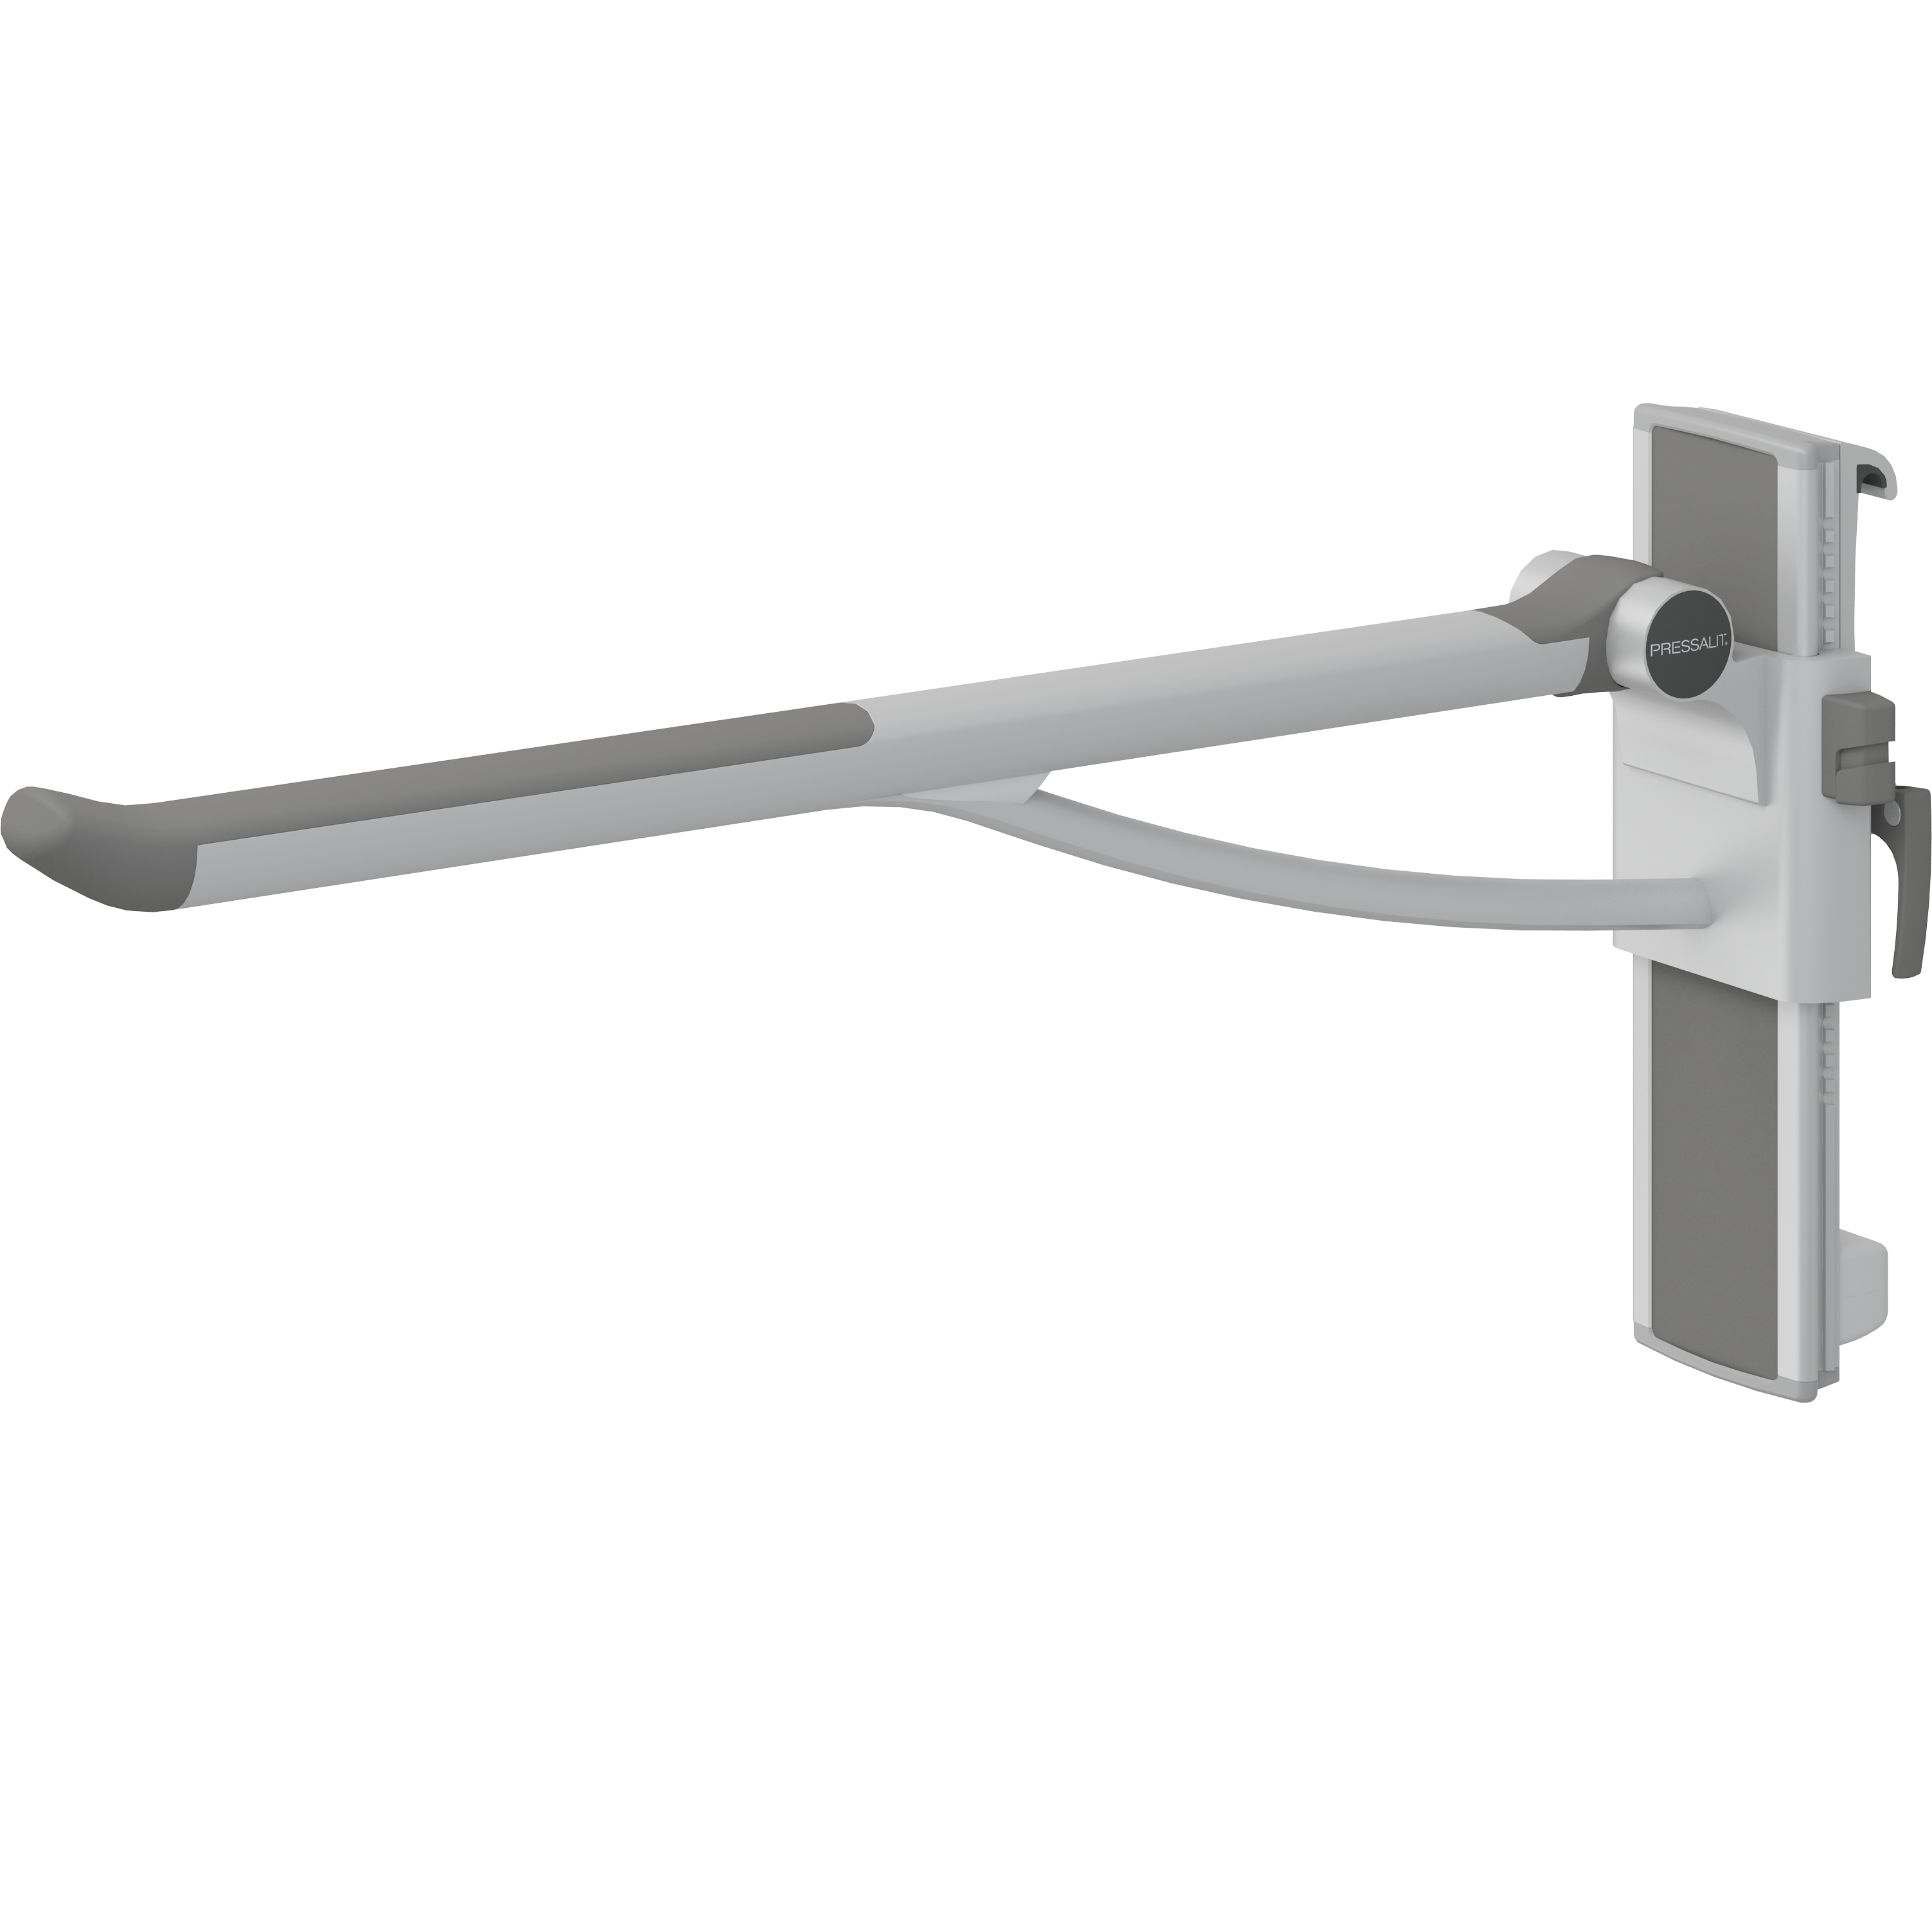 PLUS support arm, 850 mm, right hand operated